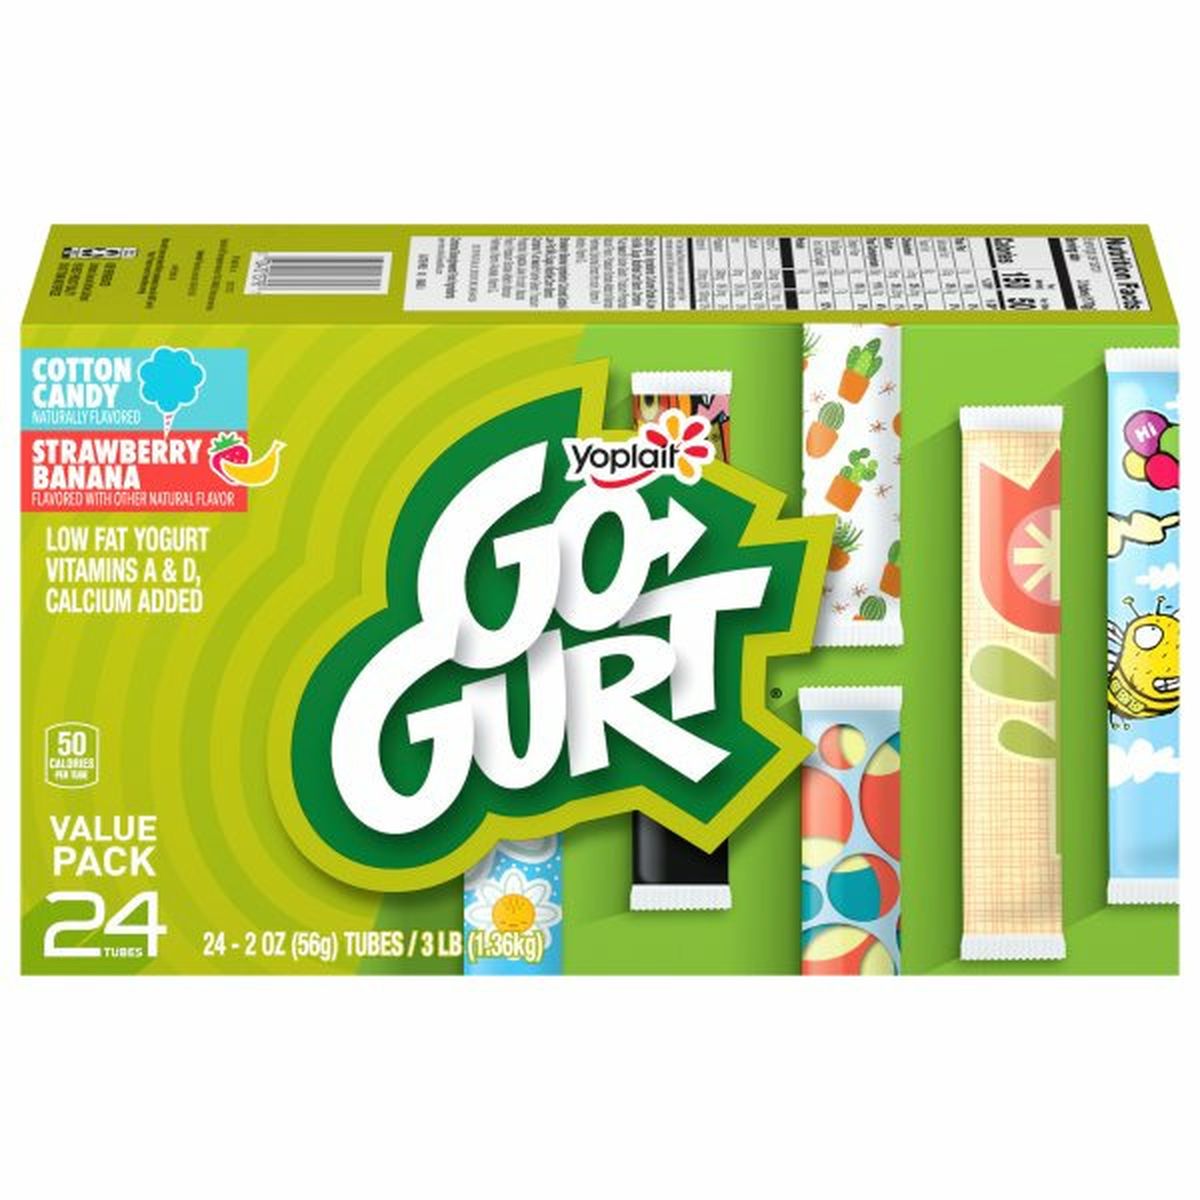 Calories in Go-Gurt Yogurt, Low Fat, Cotton Candy/Strawberry Banana, 24 Value Pack